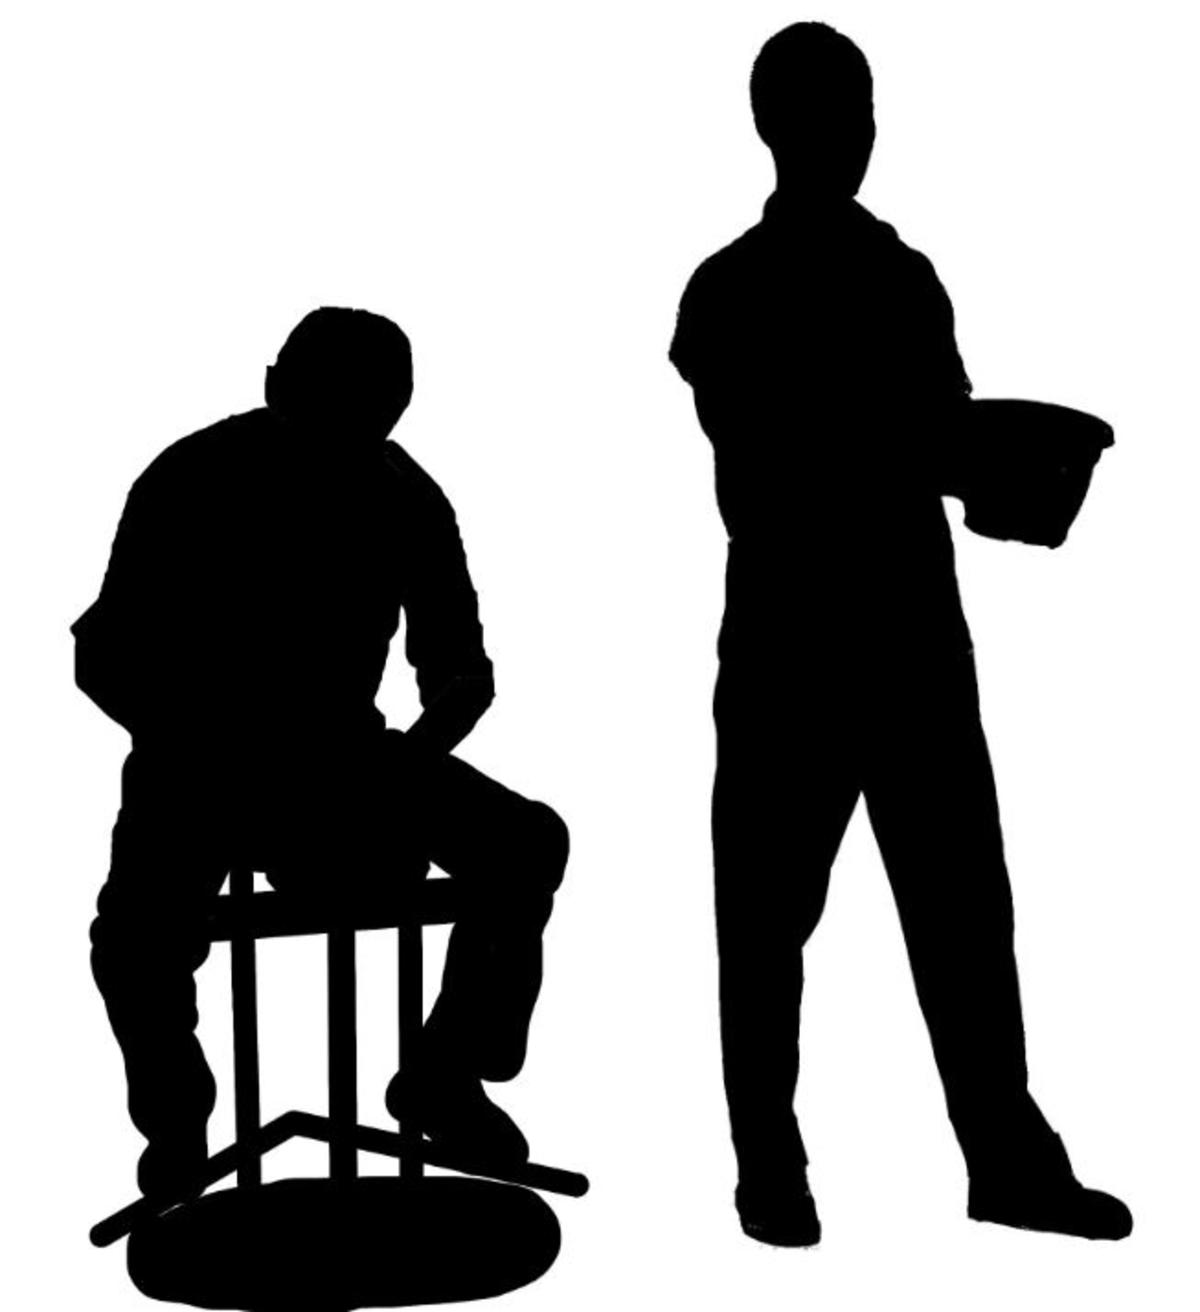 Two silhouettes: on the left, a man sitting at an 18th-century pottery wheel throwing a clay pot, and on the right, a standing man holding a clay pot in his hands.